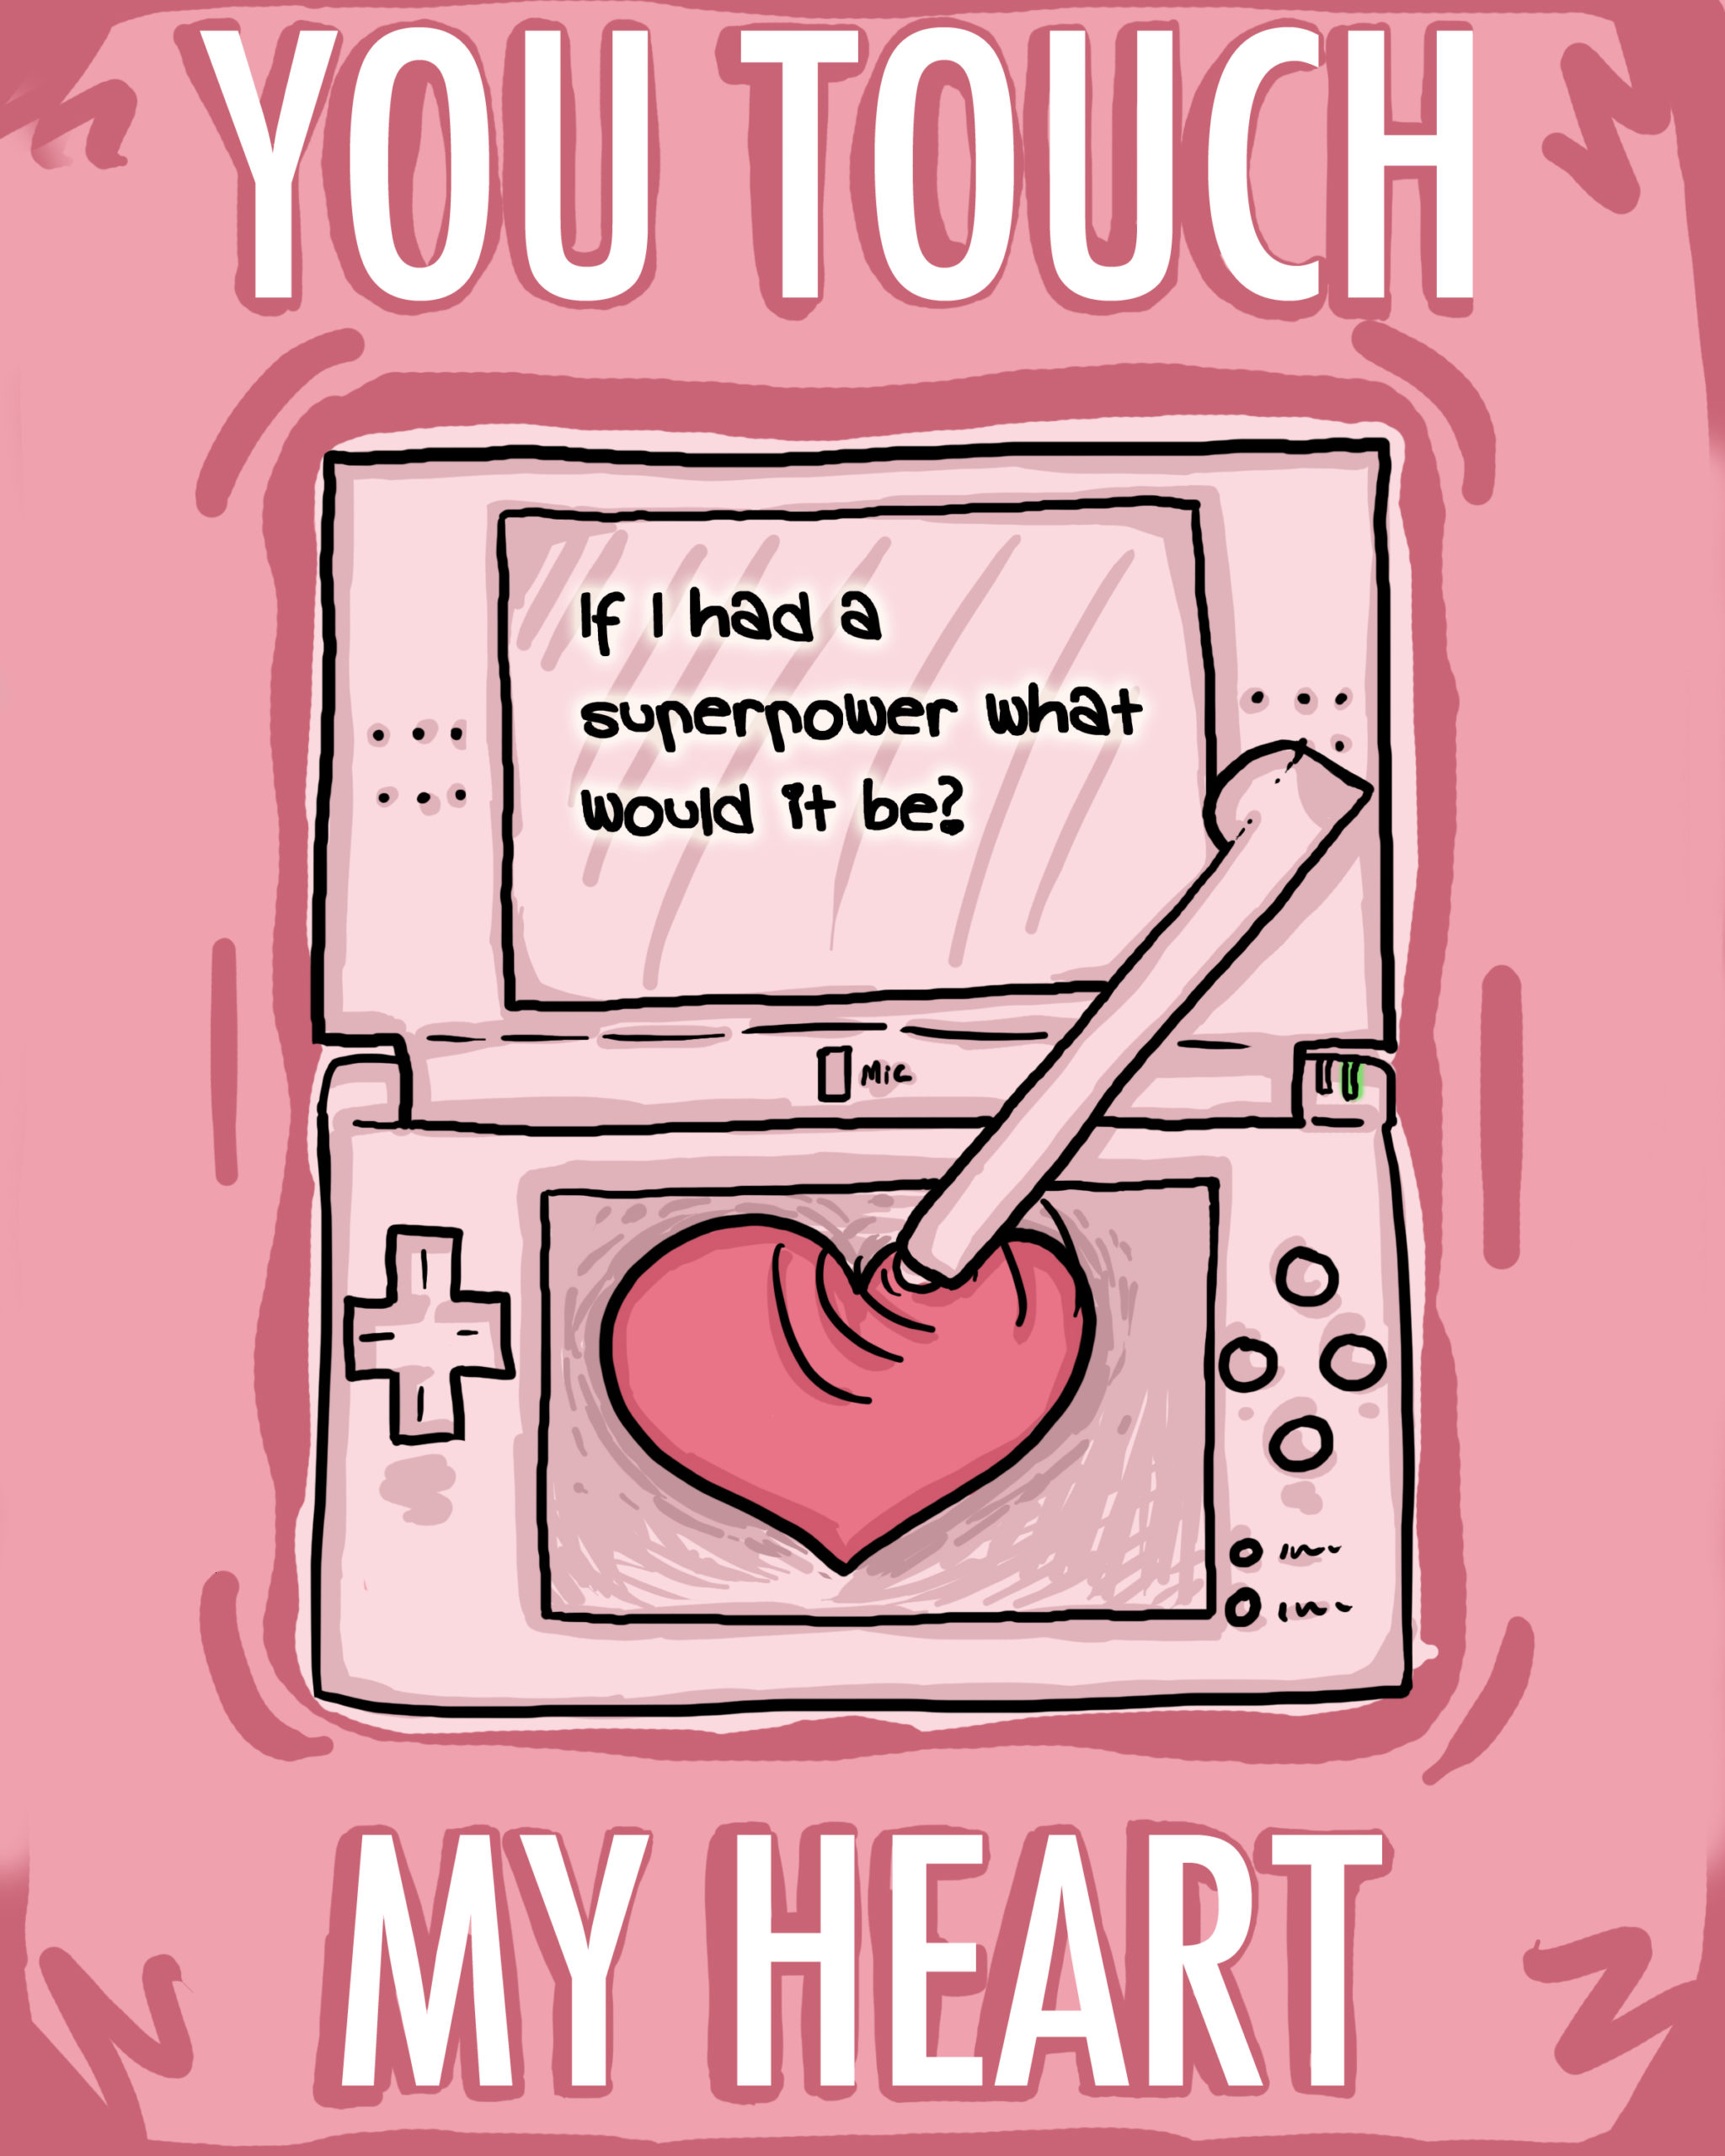 Valentine's day the geeky way